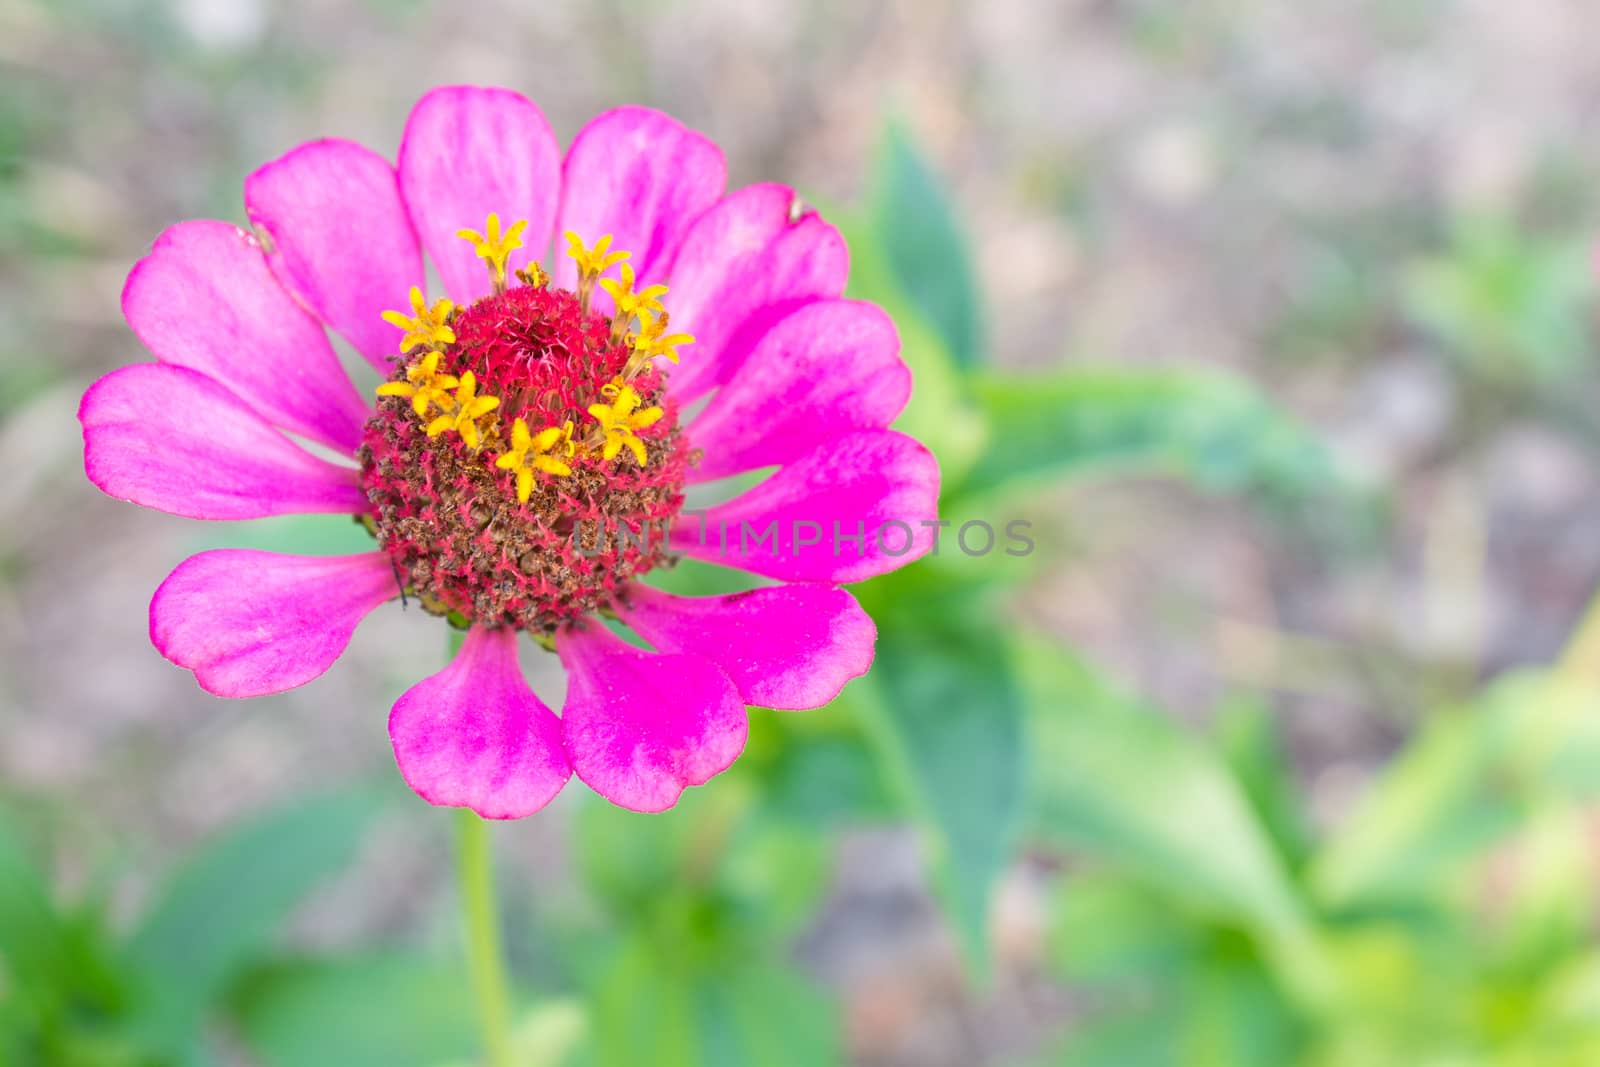 Pink Zinnia Flower at Top Left Closeup by steafpong